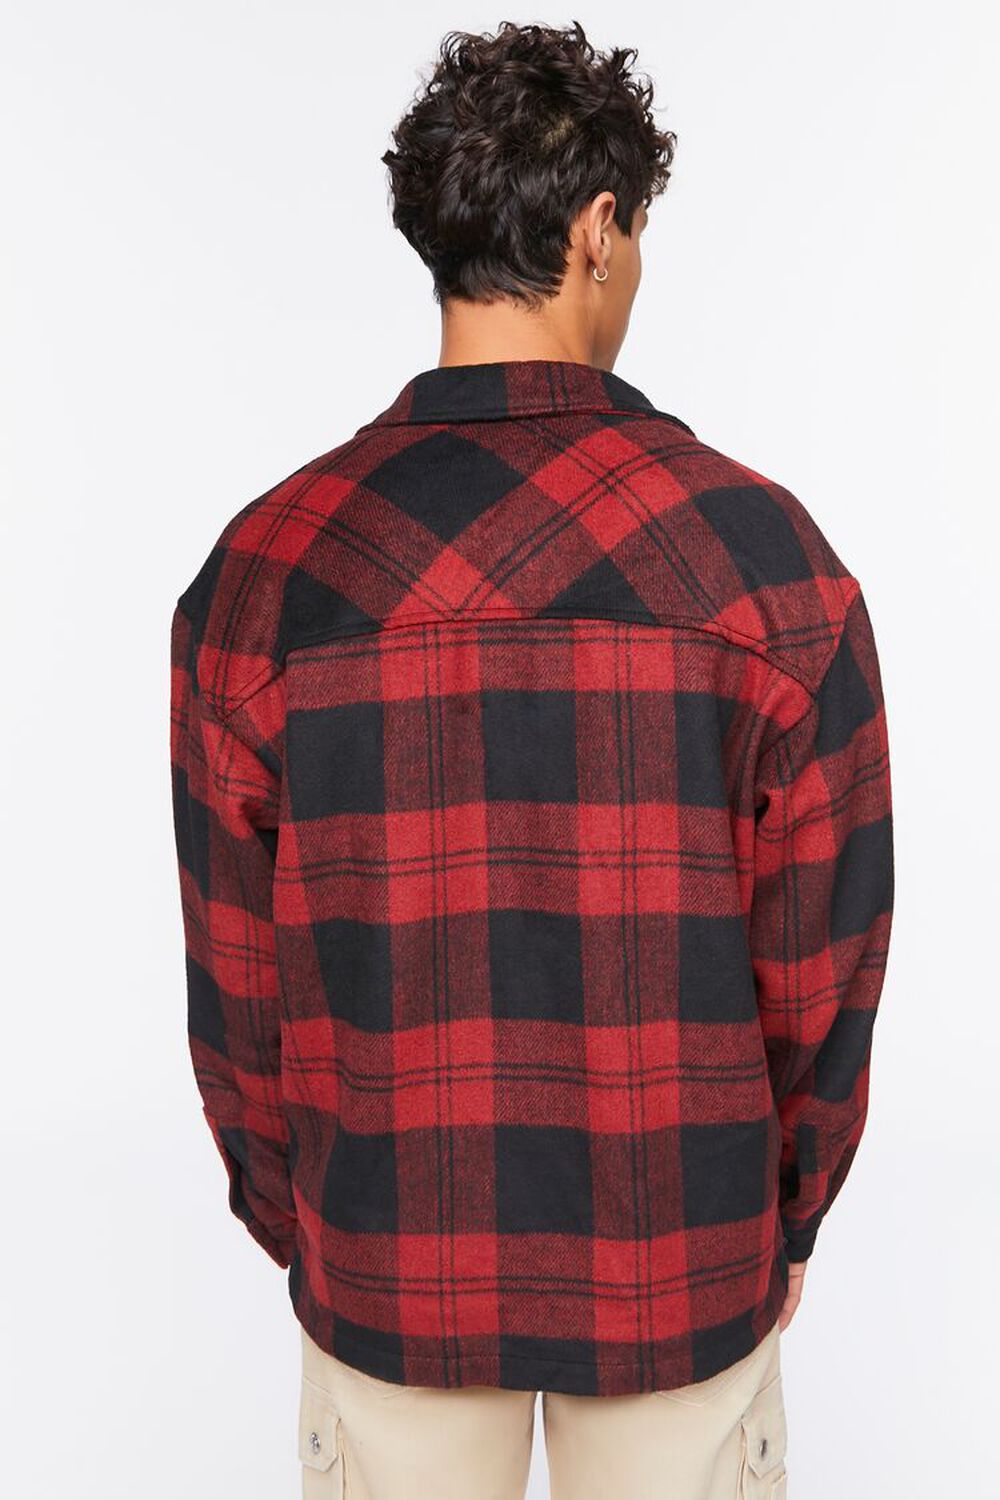 RED/BLACK Plaid Button-Up Shirt, image 3